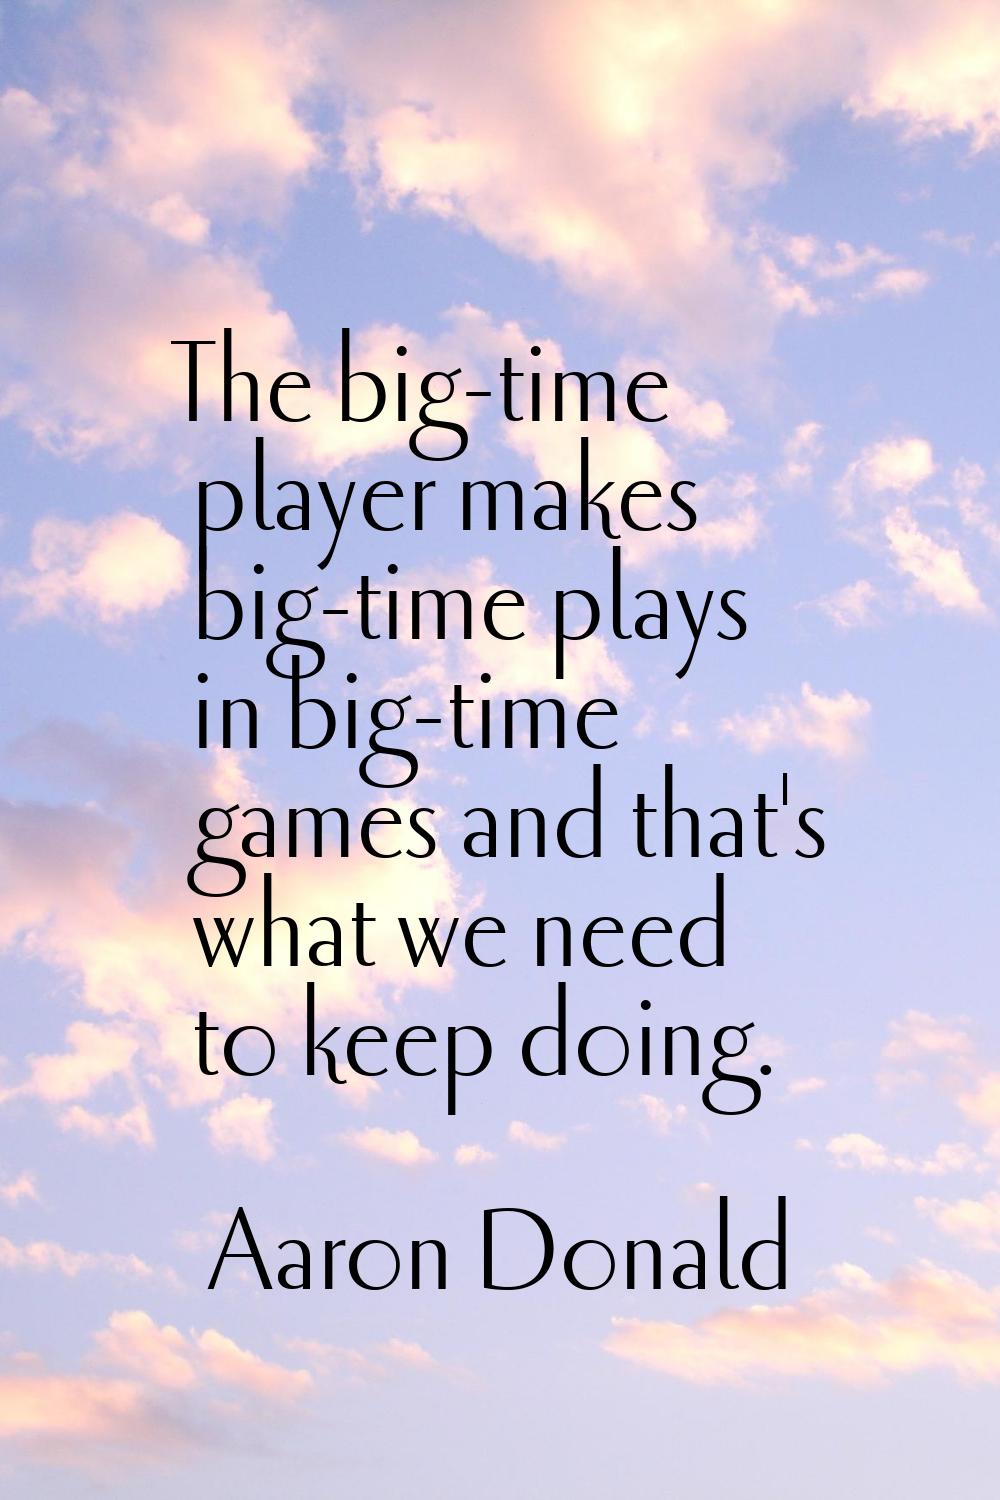 The big-time player makes big-time plays in big-time games and that's what we need to keep doing.